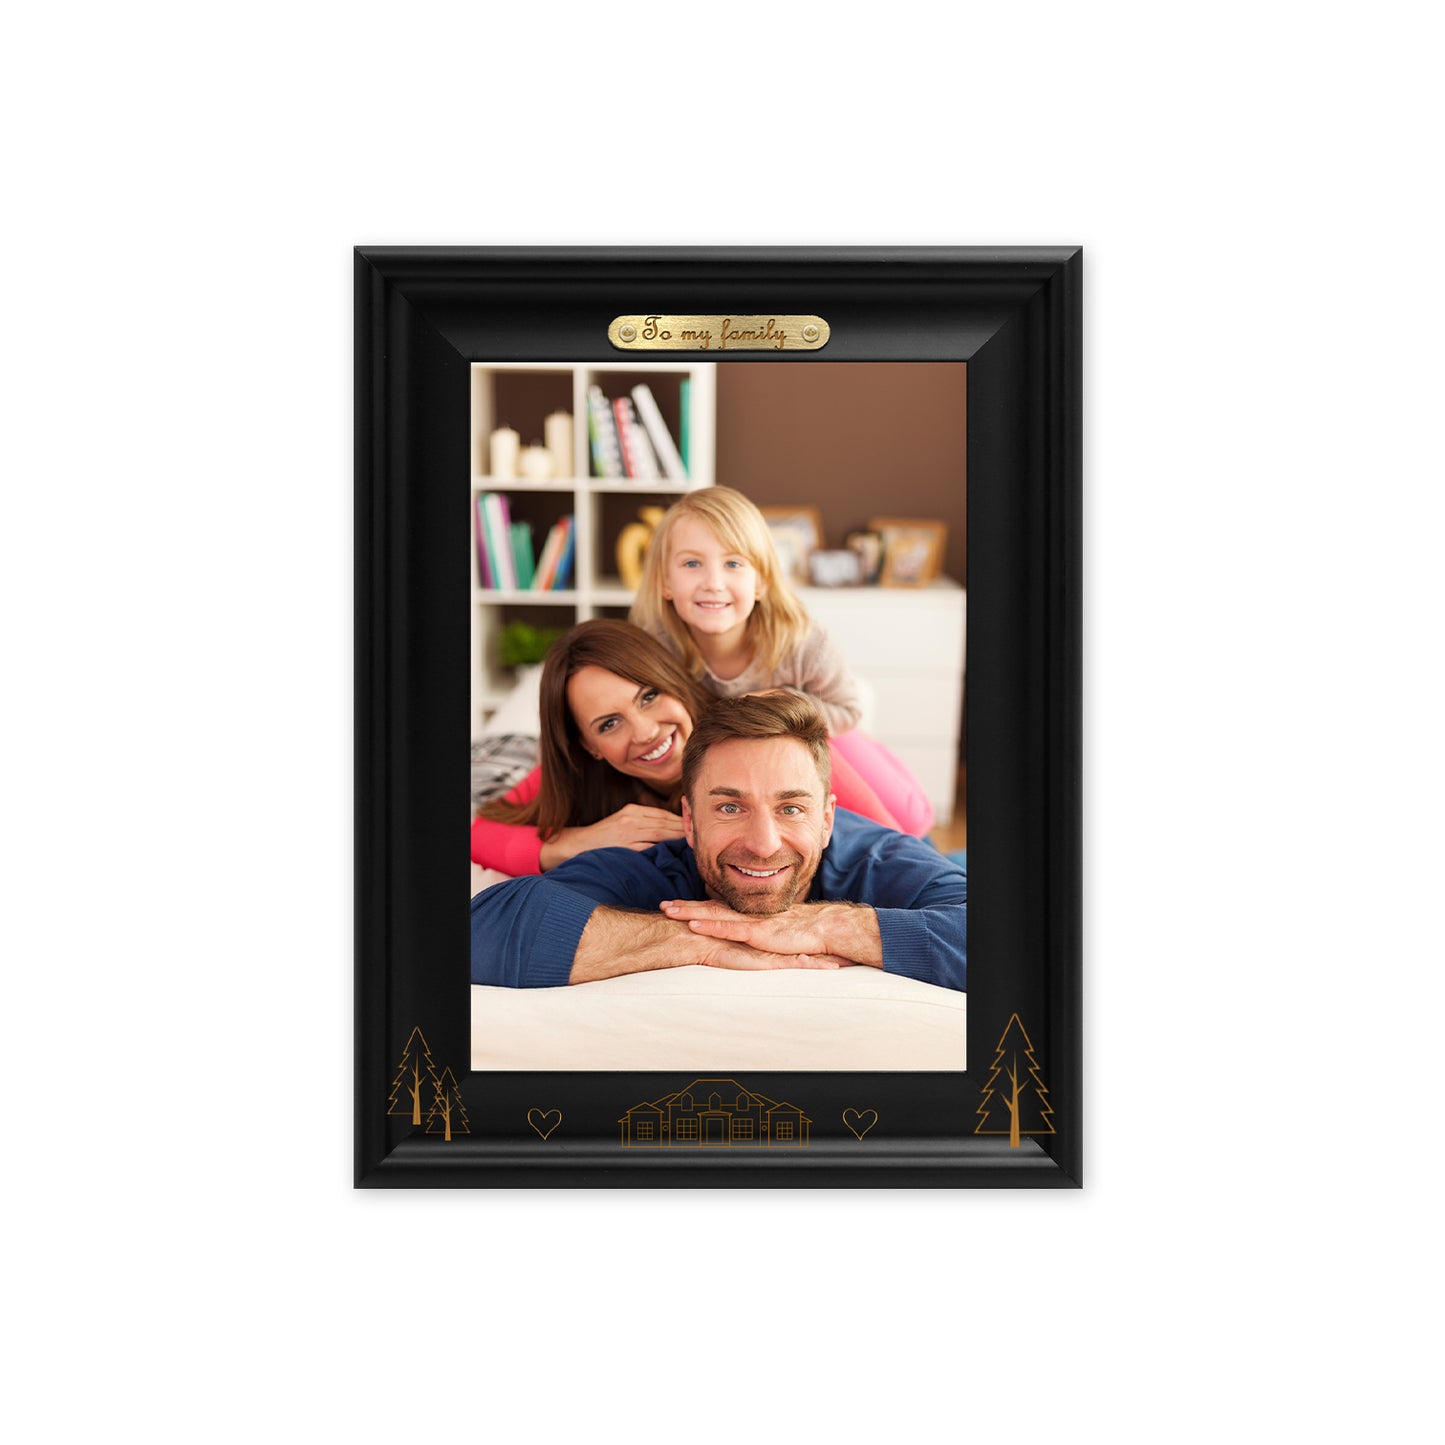 Dotride Custom Photo Frame, Wooden Photo Frame With Custom Wood Carving, can be engraved with any text you want, suitable for various themes, build